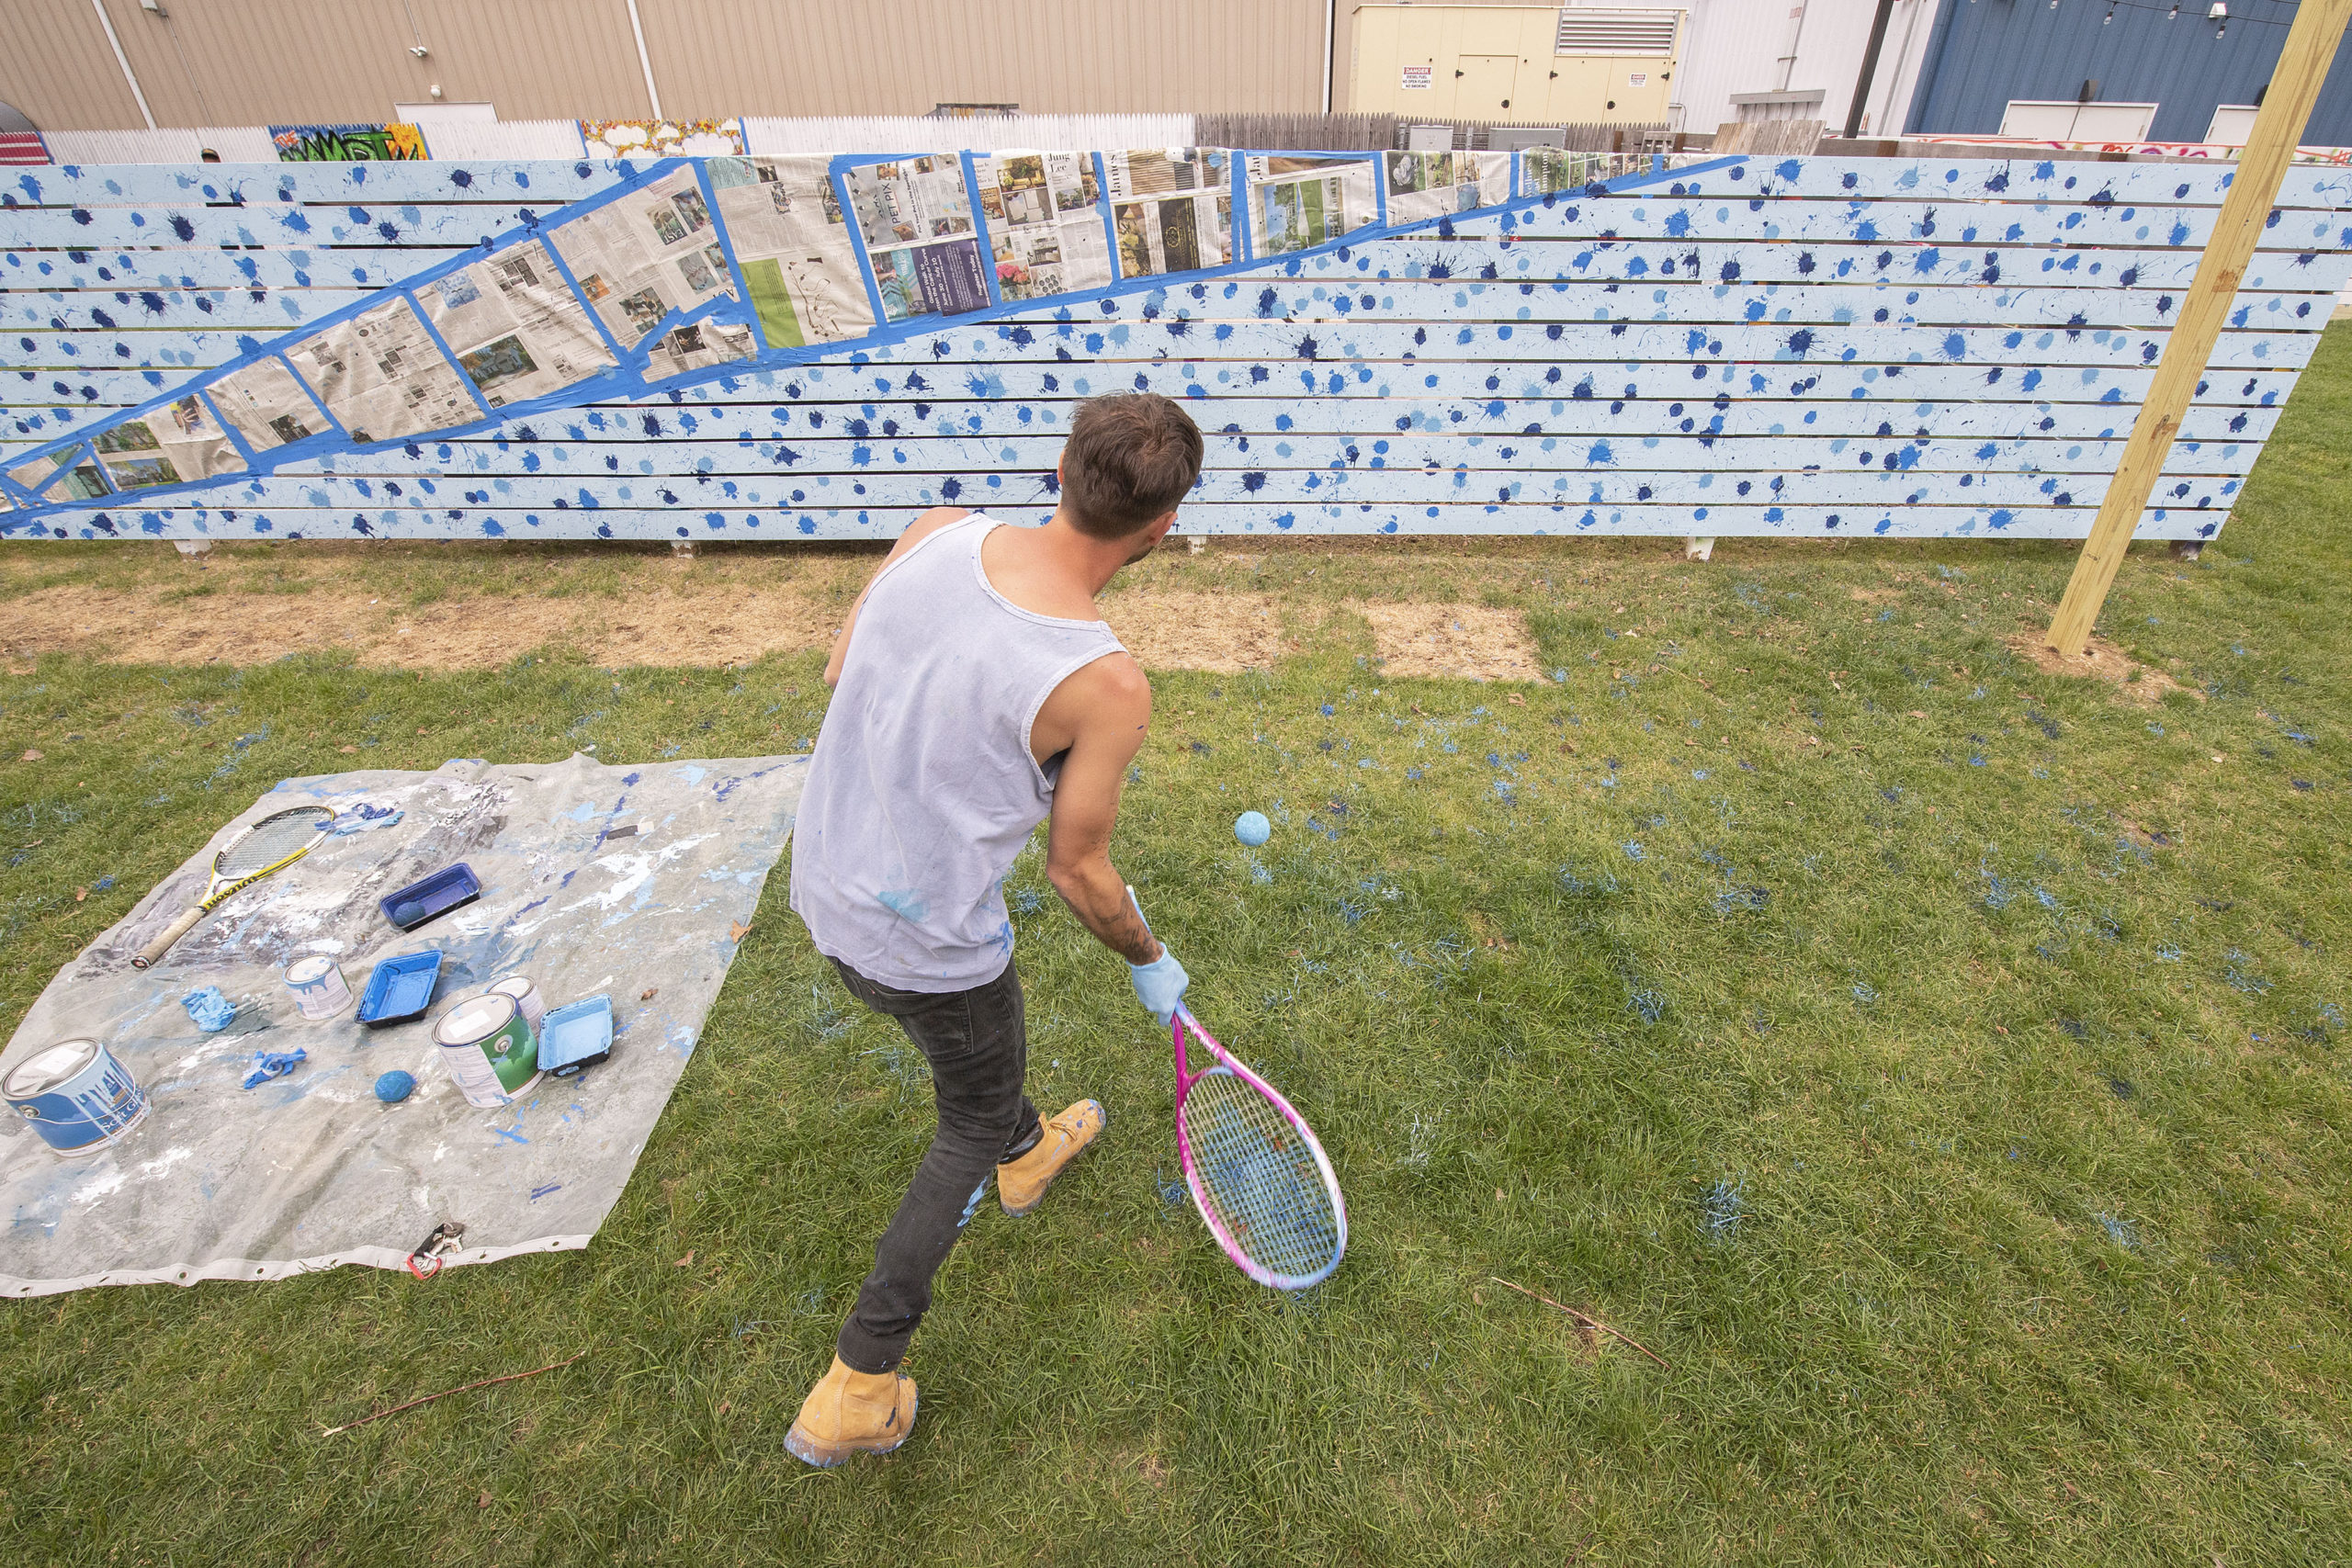 Although technically not part of the competition, Clubhouse employee Matthew Classens uses a tennis racket and a ball soaked in paint to create unique art during the Live Mural and Graffiti Competition at The Clubhouse on Saturday, June 12.